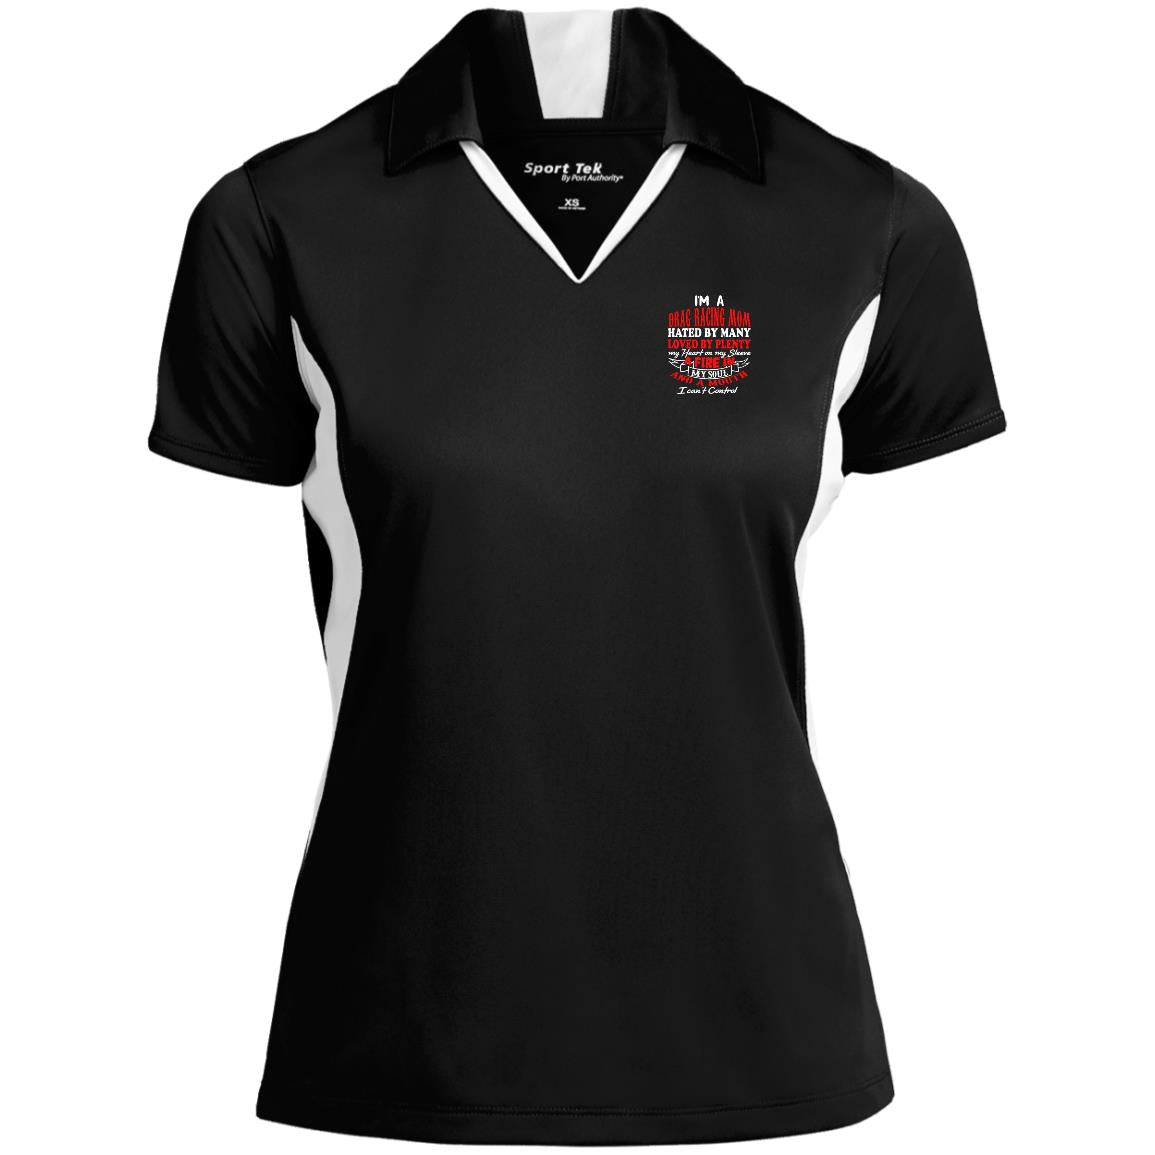 I'm A Drag Racing Mom Hated By Many Loved By Plenty Ladies' Colorblock Performance Polo